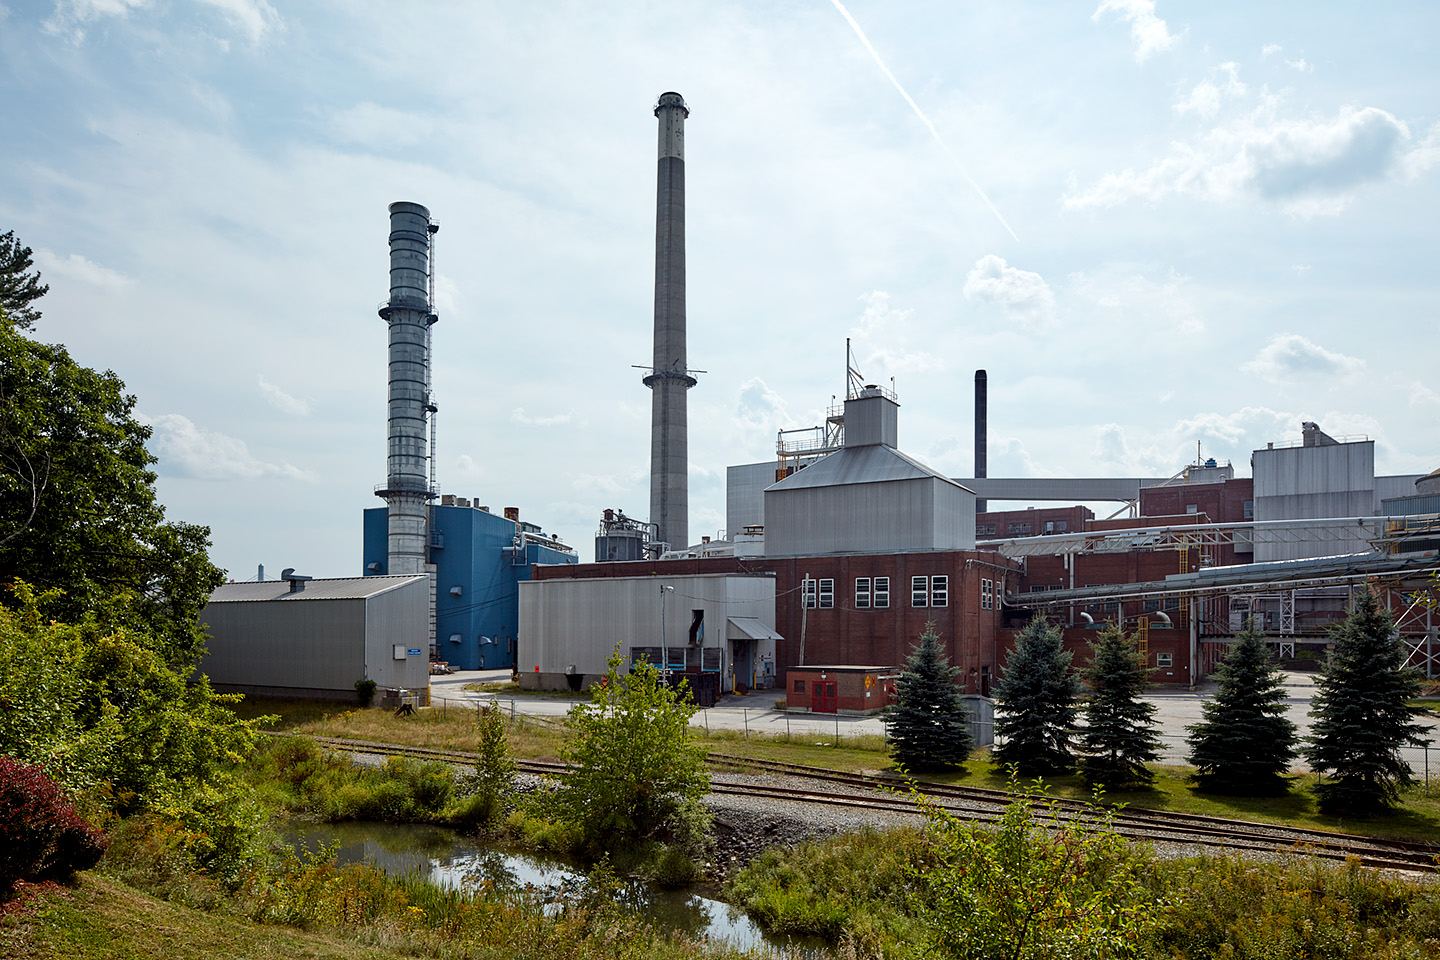 Mothballed paper mill. Canon 5DS R with the 24mm TSE II lens. Bucksport, ME. August, 2015.